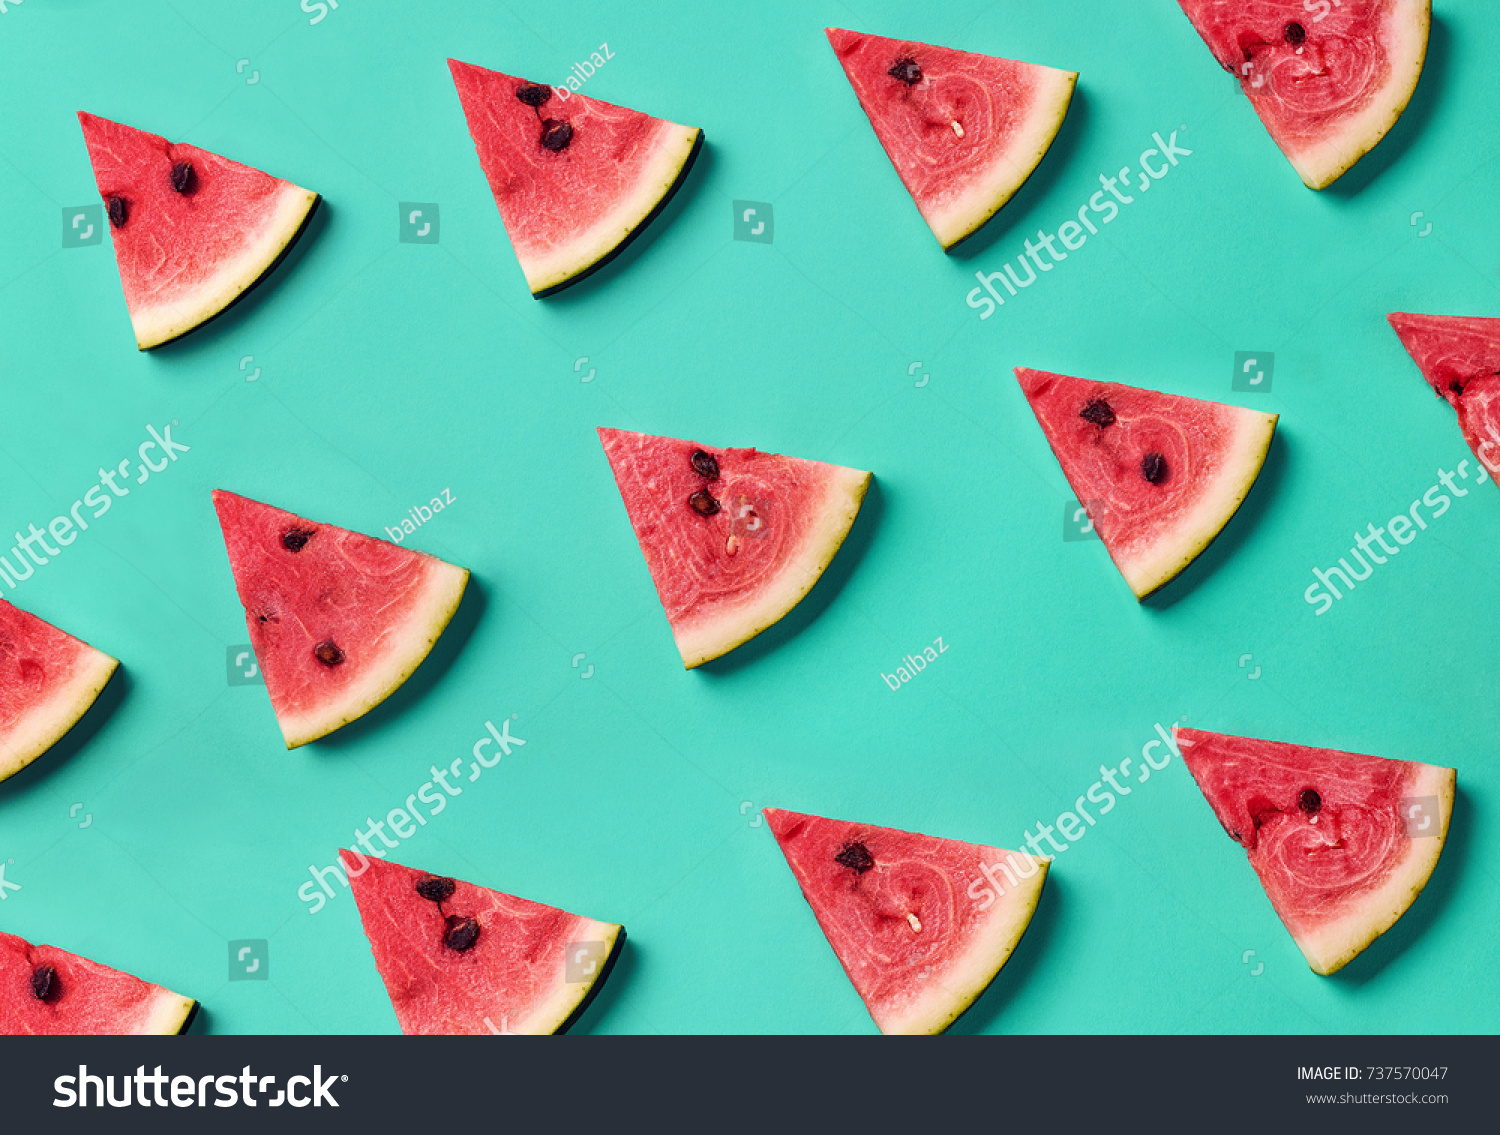 Colorful fruit pattern of fresh watermelon slices on blue background. From top view #737570047